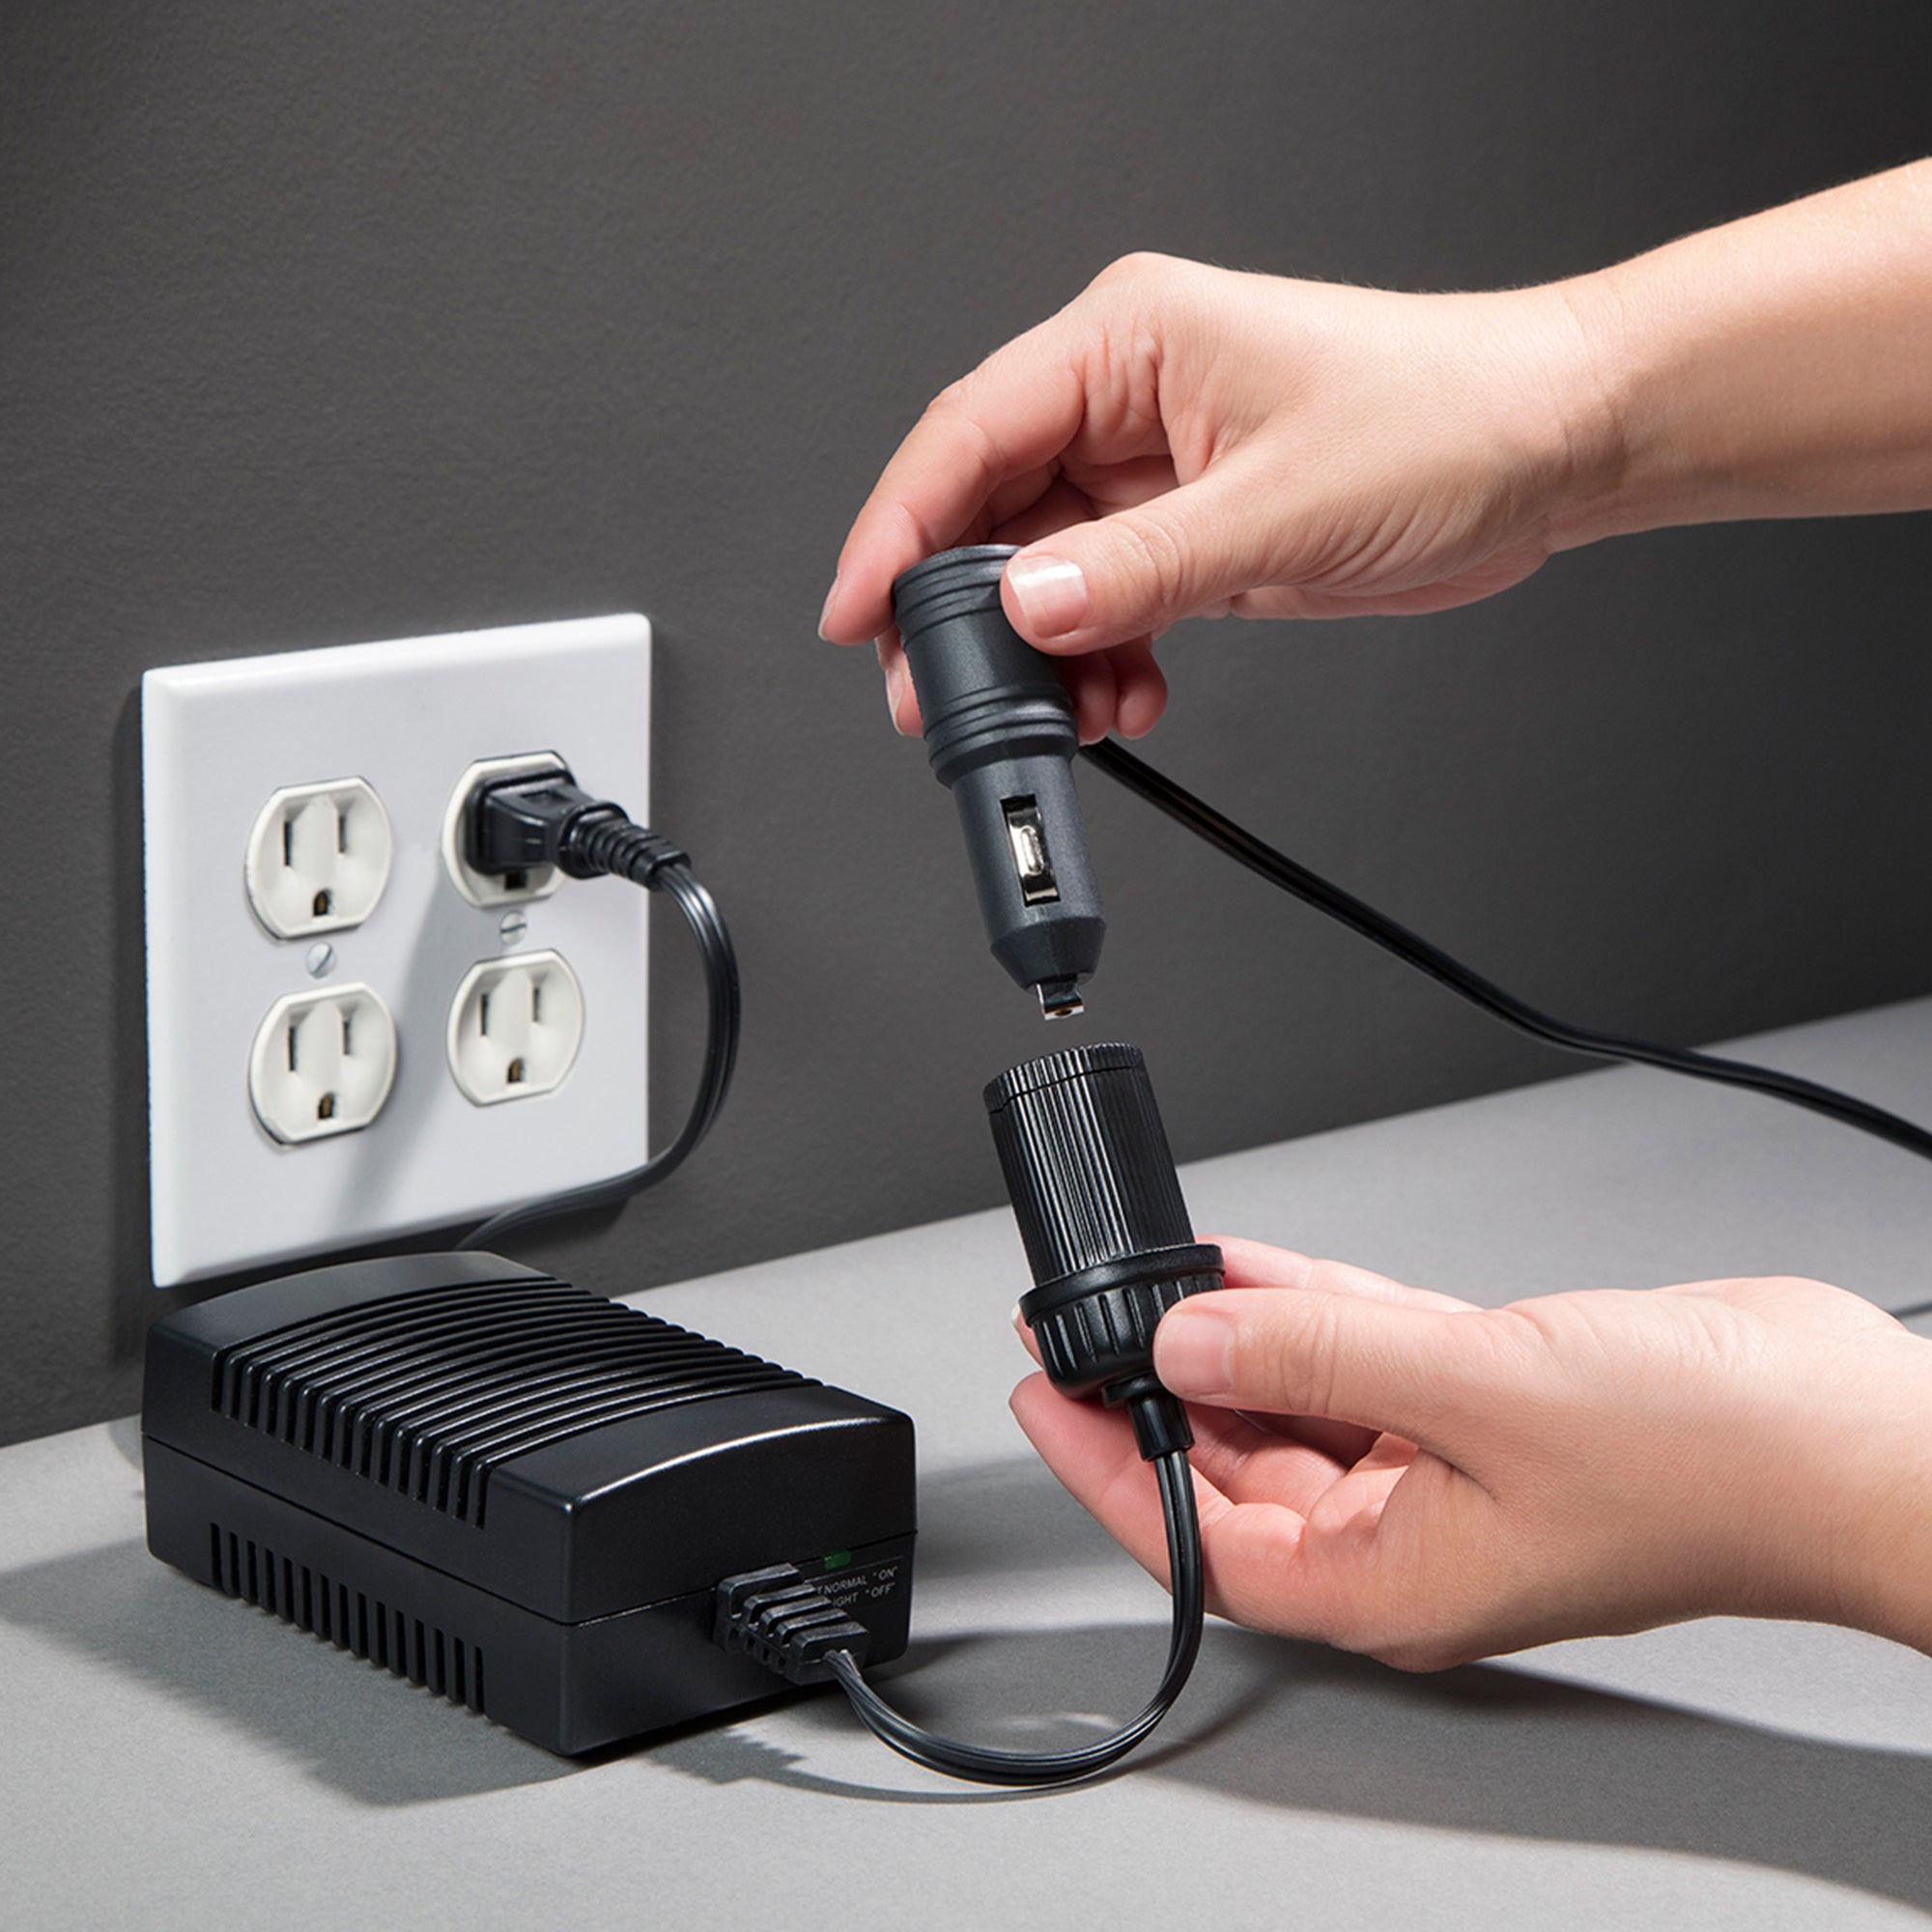 Lifestyle image of the AC to DC power adapter plugged into a white indoor AC receptacle on a dark gray wall with a person’s hands inserting a 12V plug into the DC adapter end